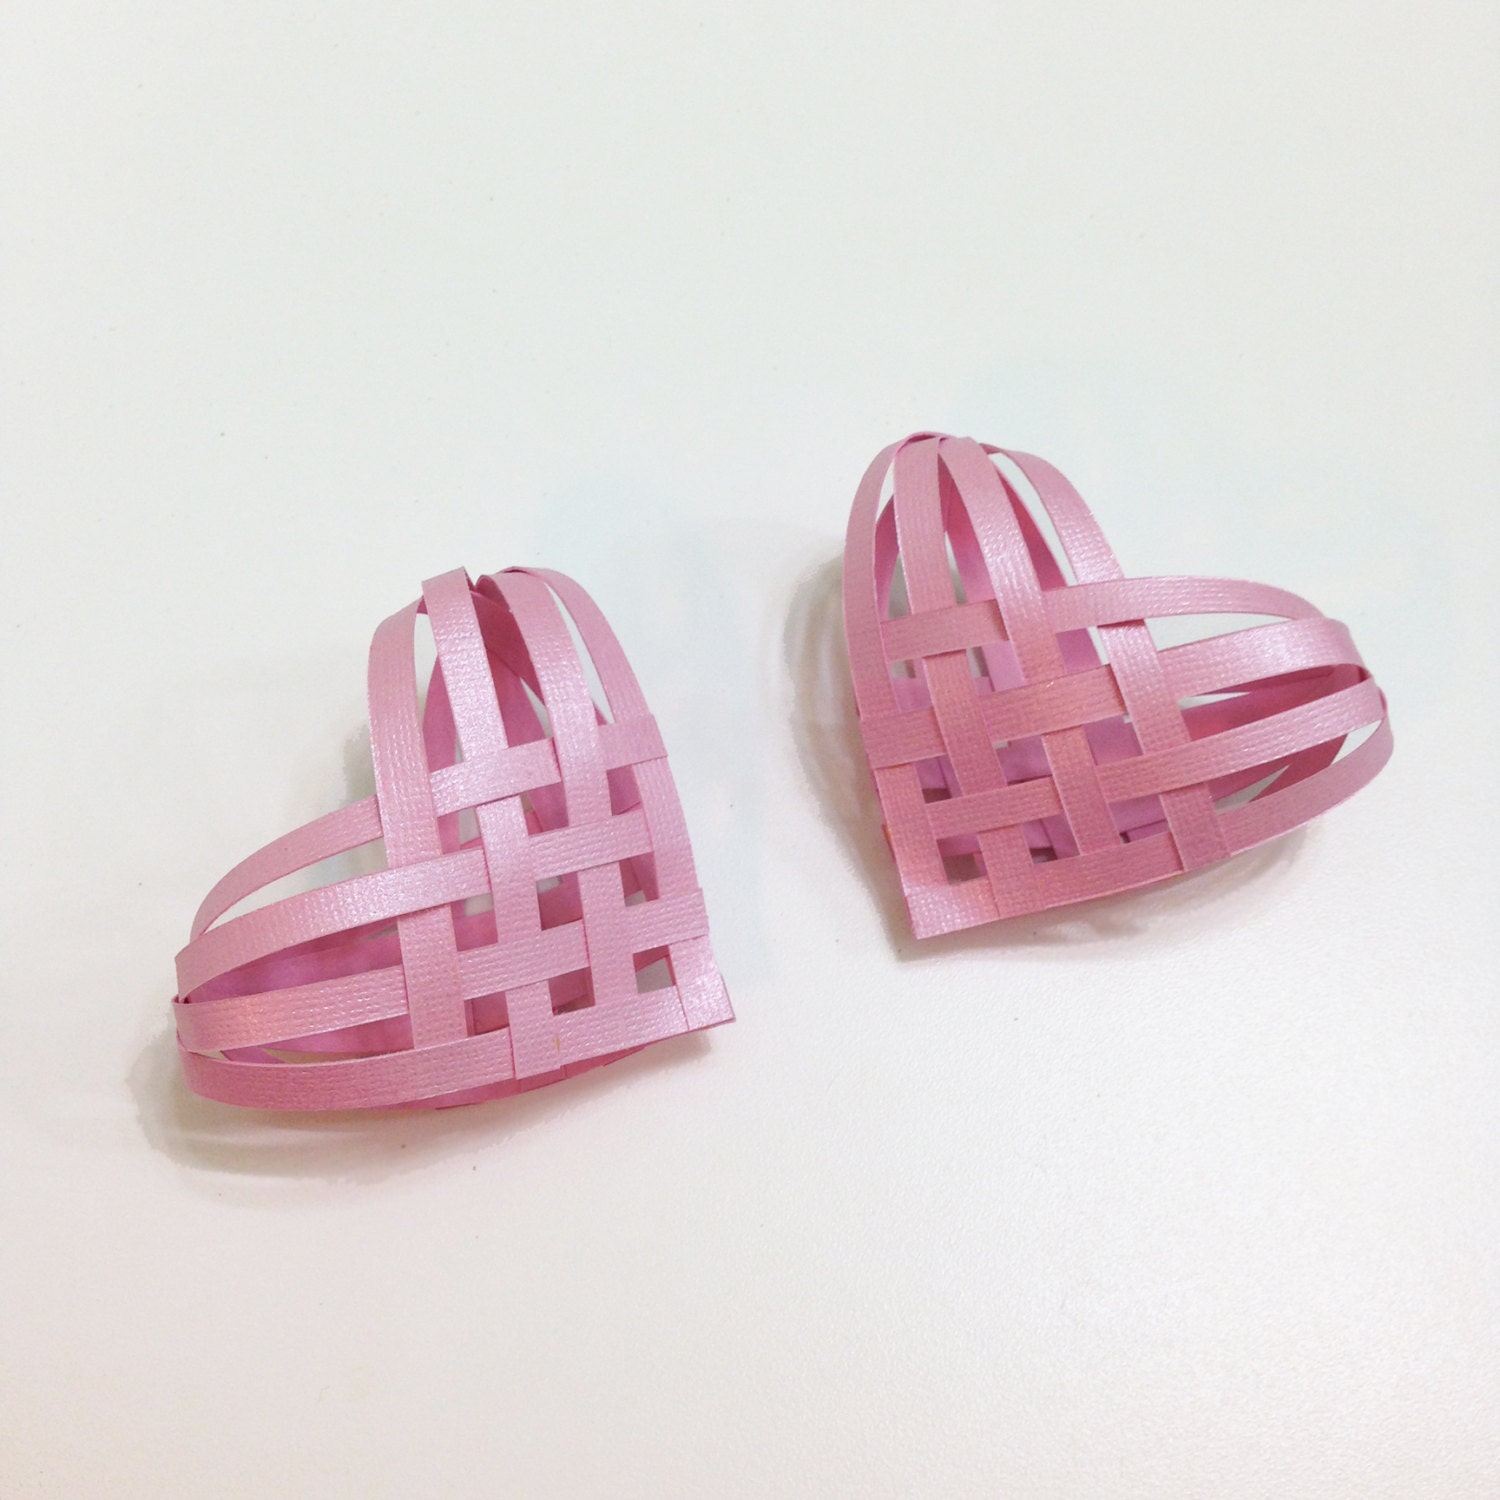 A Pair of Pink Paper Hearts woven 3D iridescent Valentines first year anniversary - Baskauta27